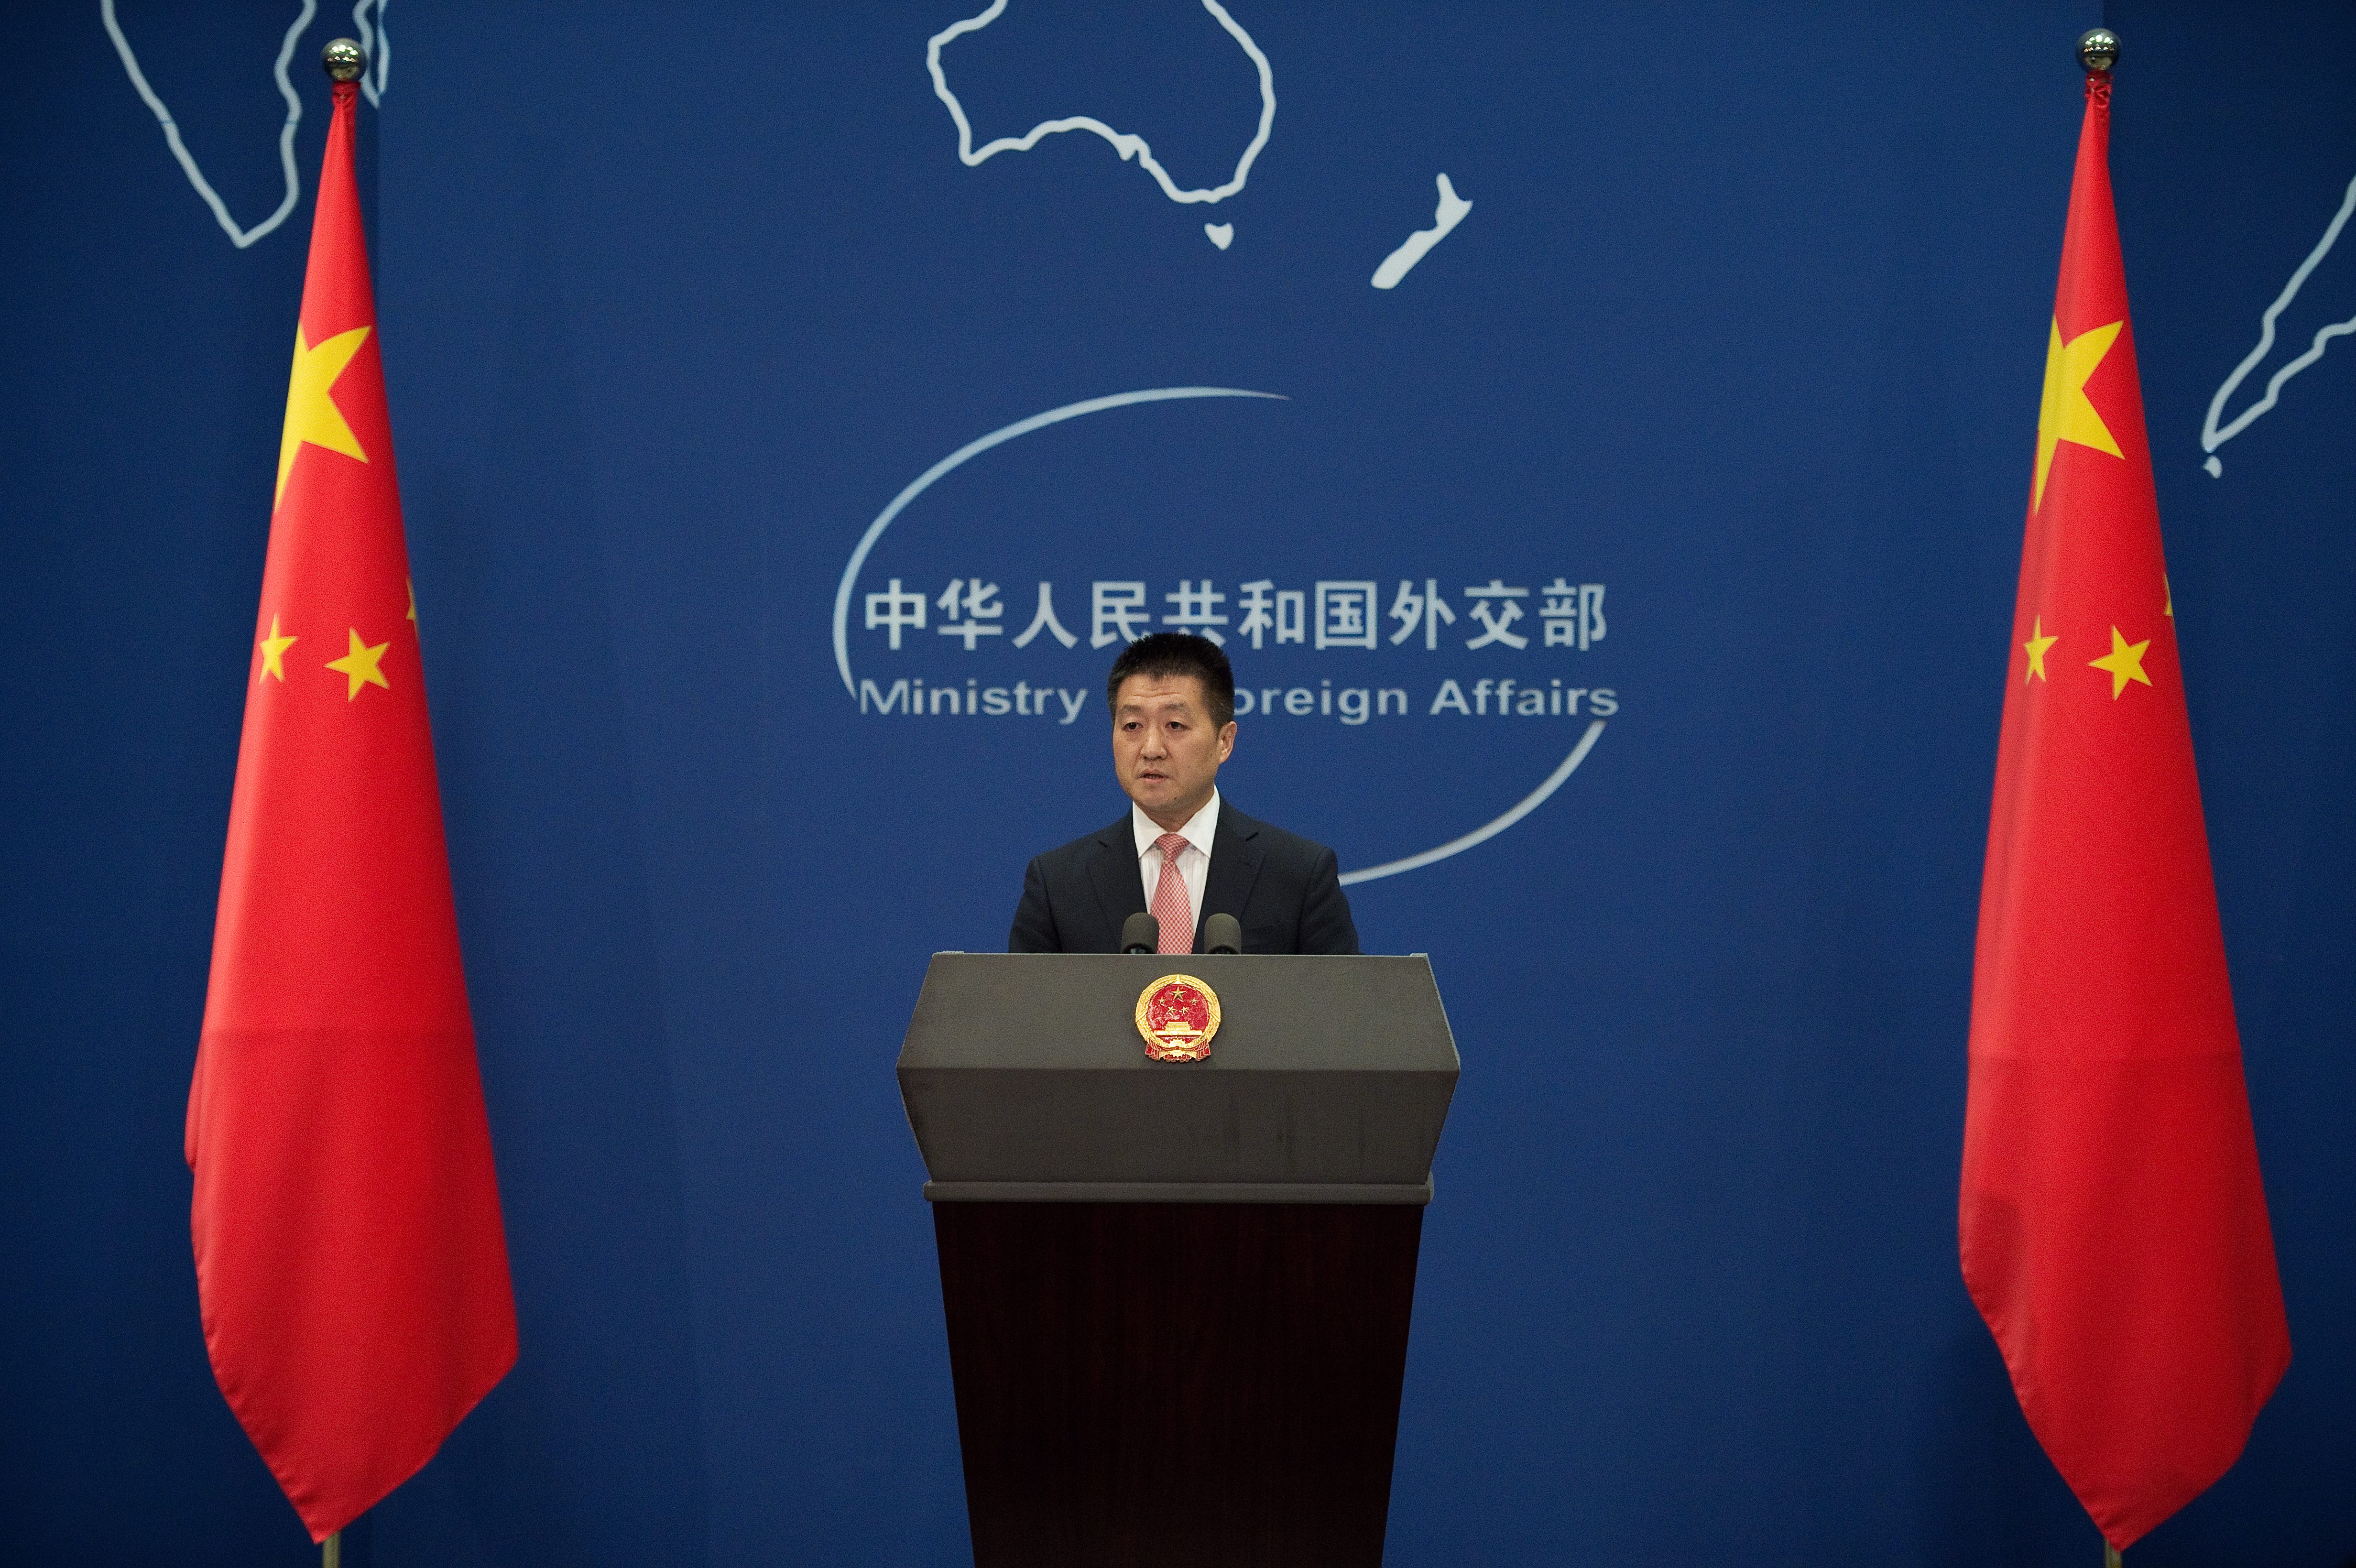 Chinese Foreign Ministry spokesman Lu Kang speaks to the media during a press conference in Beijing on July 13, 2016. China warned its rivals against turning the South China Sea into a "cradle of war" and threatened an air defence zone there, after its claims to the strategically vital waters were declared invalid. / AFP PHOTO / NICOLAS ASFOURI